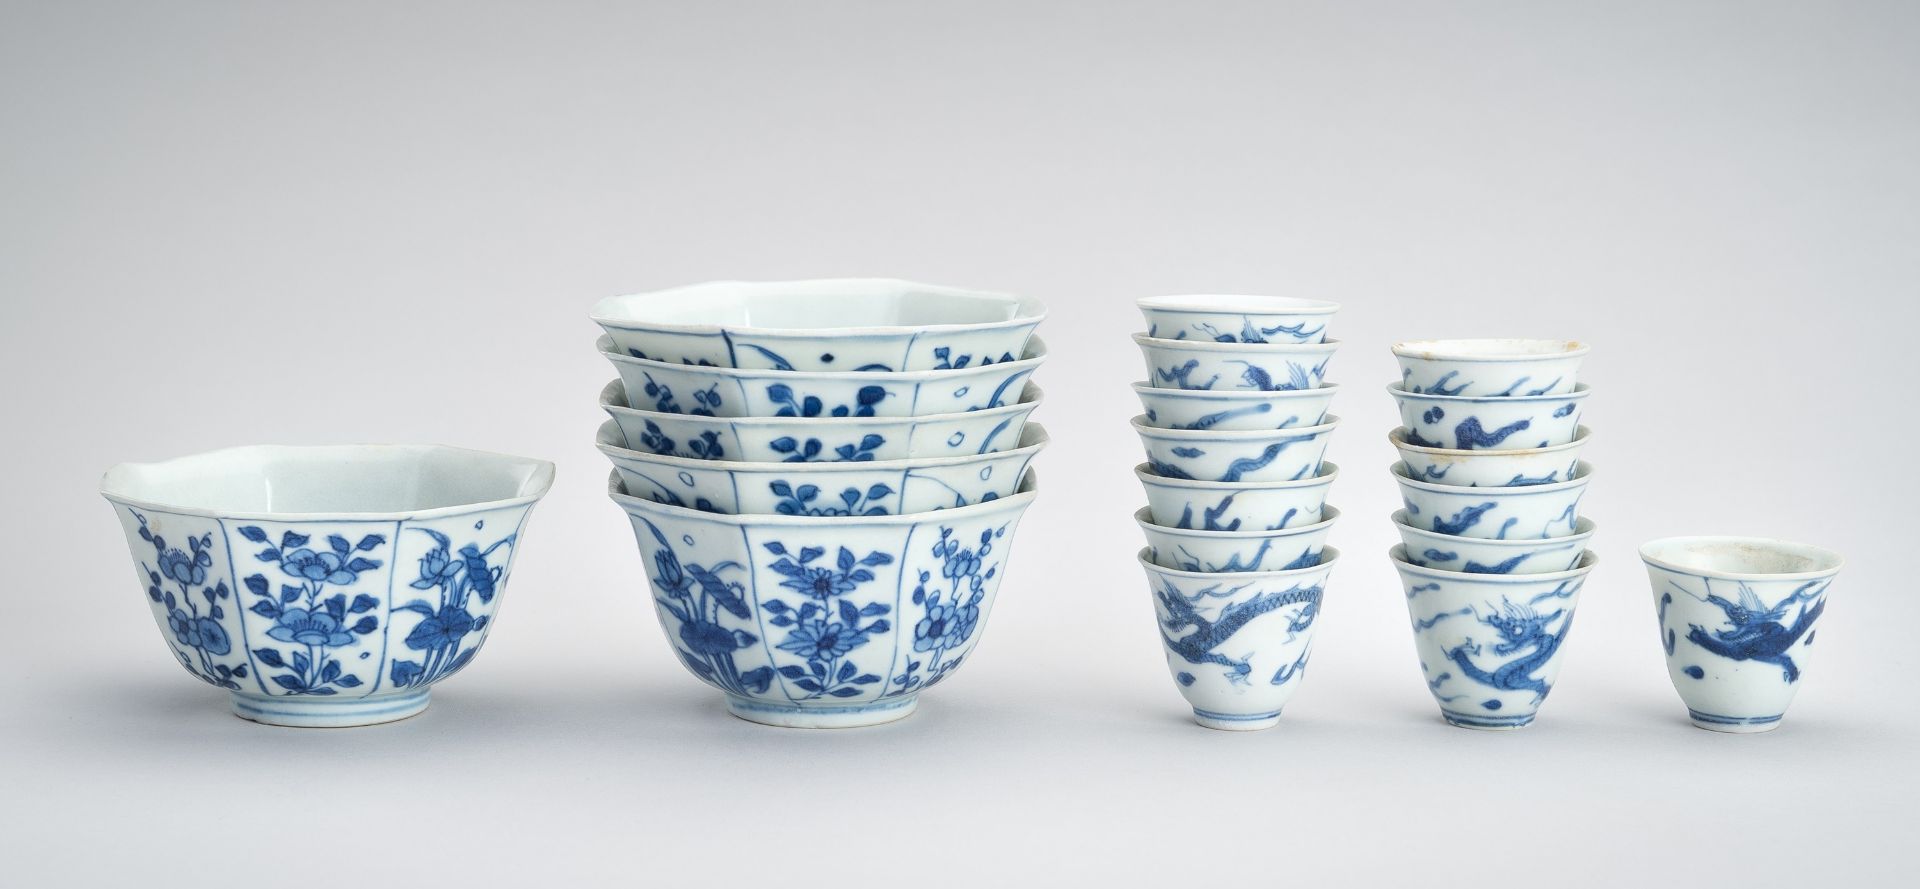 A BLUE AND WHITE PORCELAIN GROUP OF 14 CUPS AND 6 BOWLS, 'HATCHER CARGO'